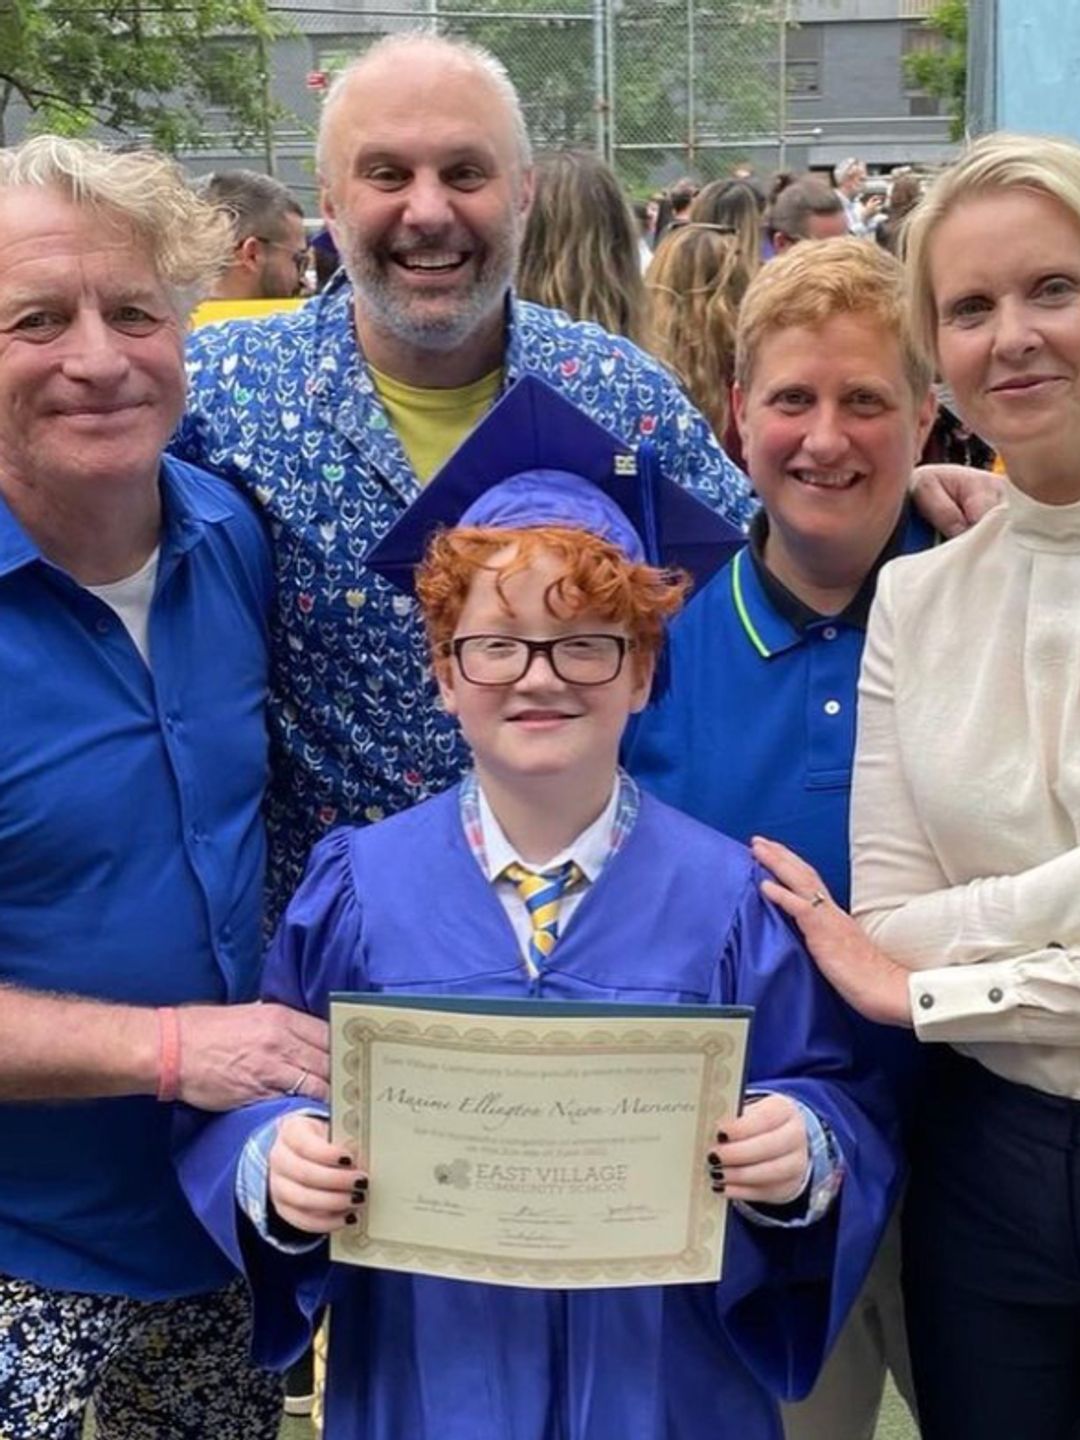 Cynthia Nixon, her wife and their family with a ginger boy in a blue gown holding a graduation certificate